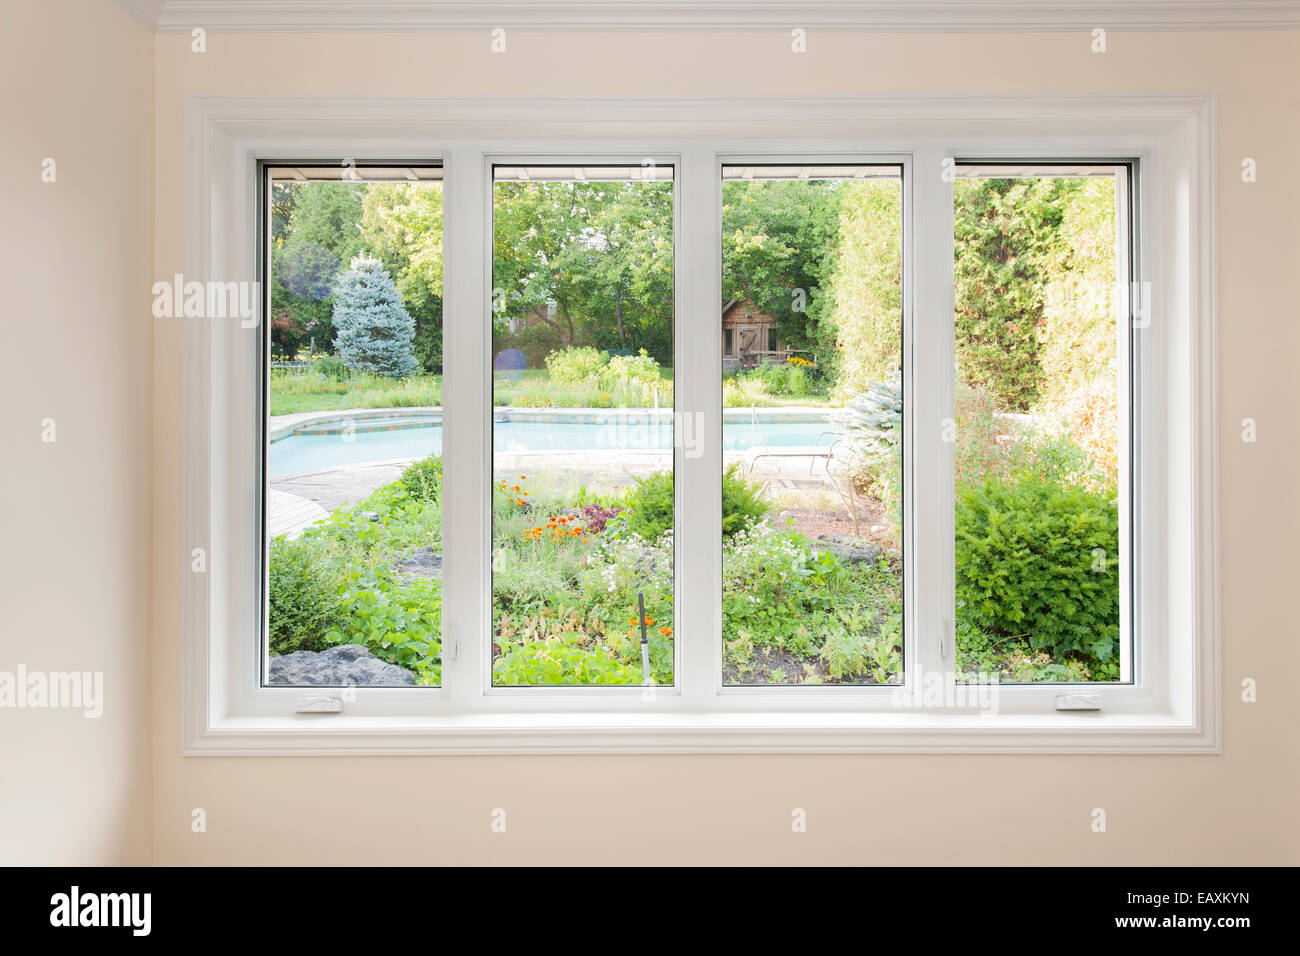 Large four pane window looking on summer backyard with pool and garden Stock Photo